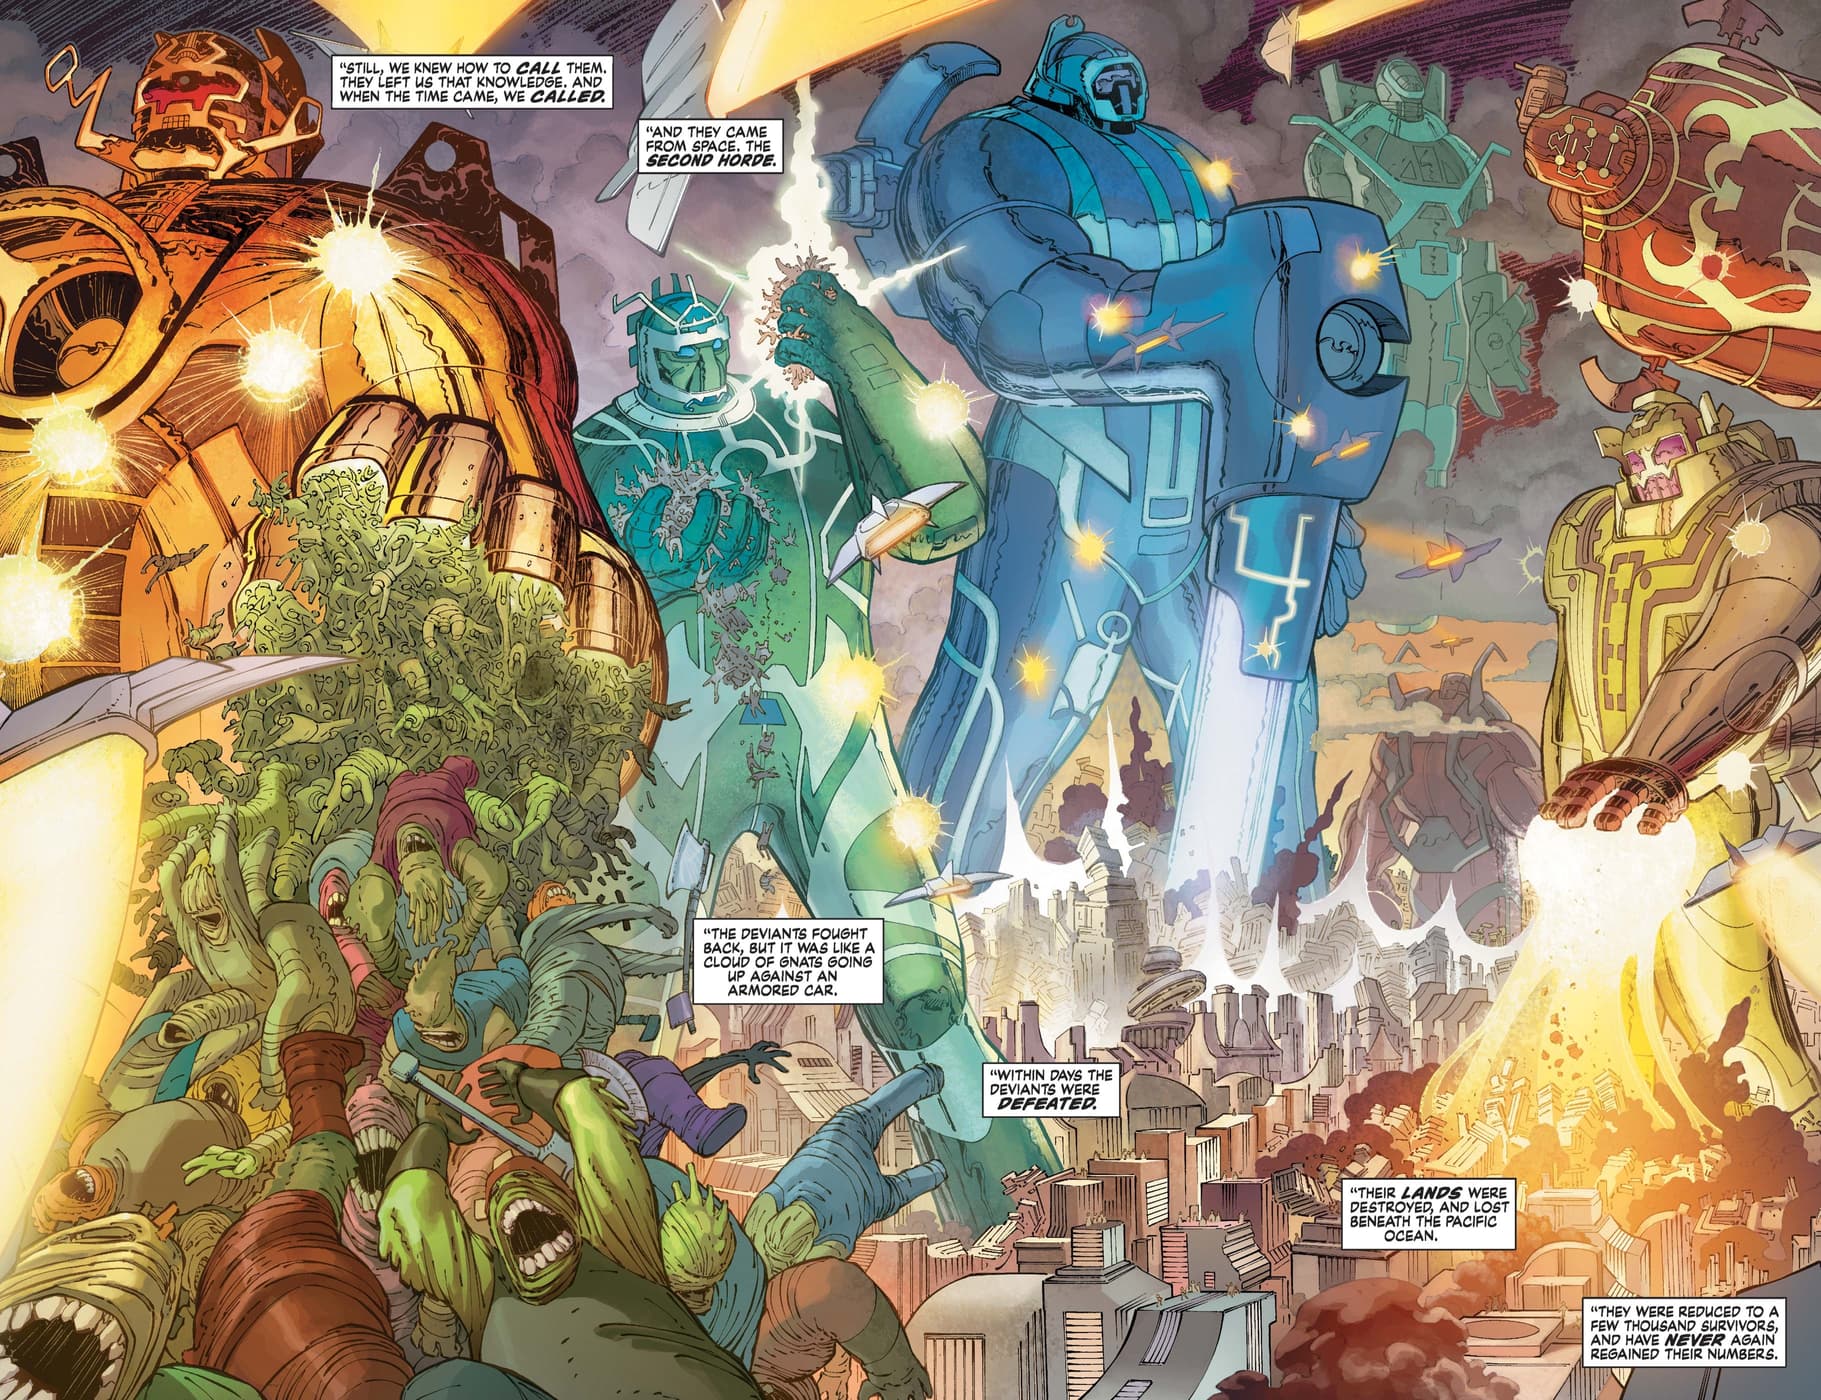 The Celestials wage war against the Eternals!